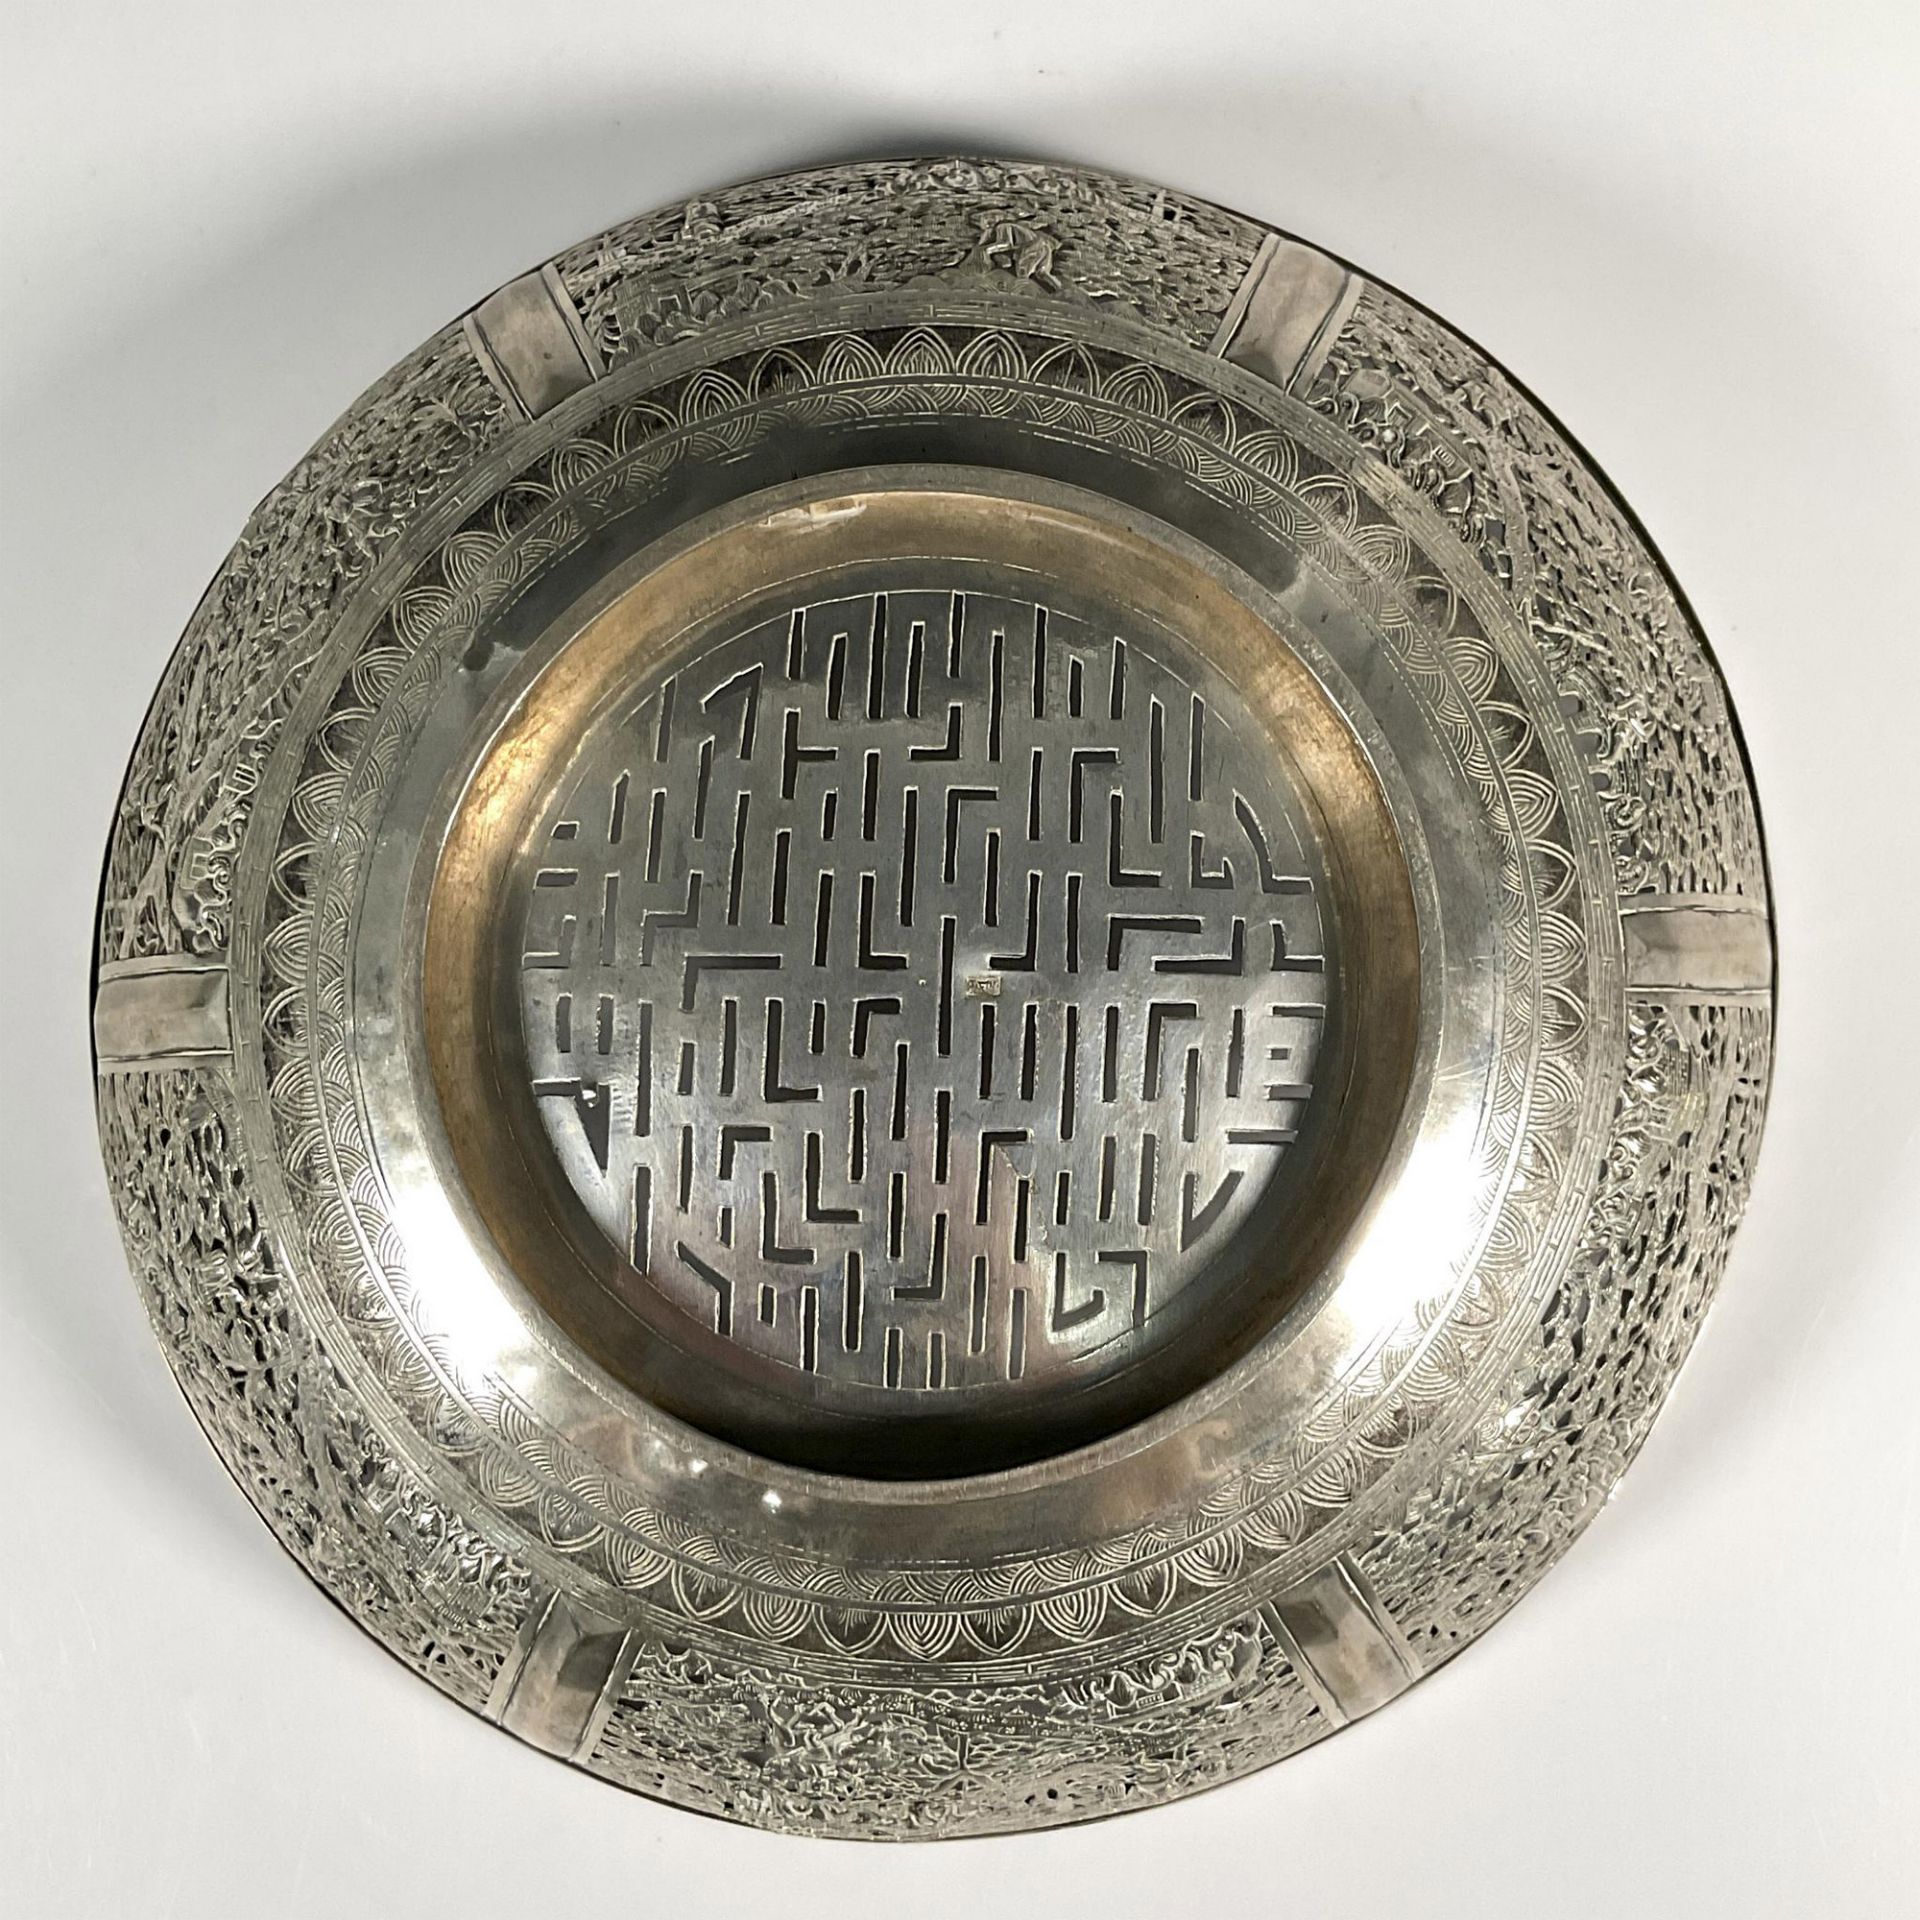 Asian Silver Decorative Pierced Bowl - Image 6 of 6